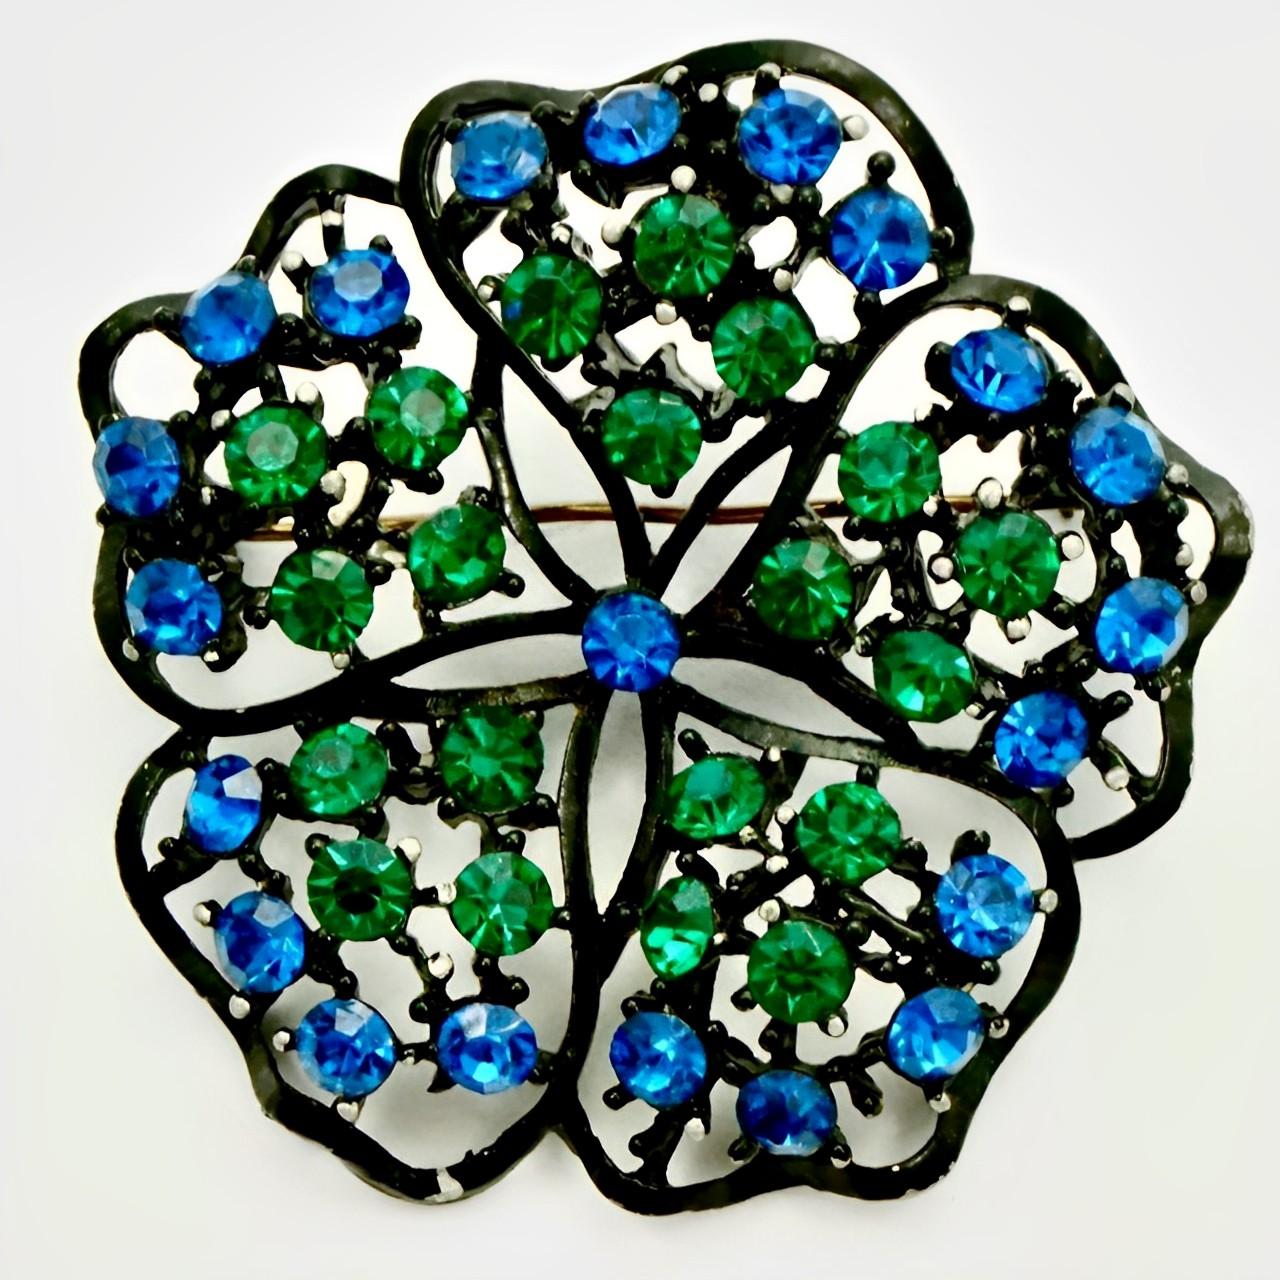 Japanned electric blue and emerald green crystal flower brooch and leaf clip on earrings. The brooch measures diameter 5 cm / 1.9 inches. The earrings are 3.1 cm / 1.2 inch by 1.9 cm / .7 inch. There is wear to the black japanned finish. The brooch